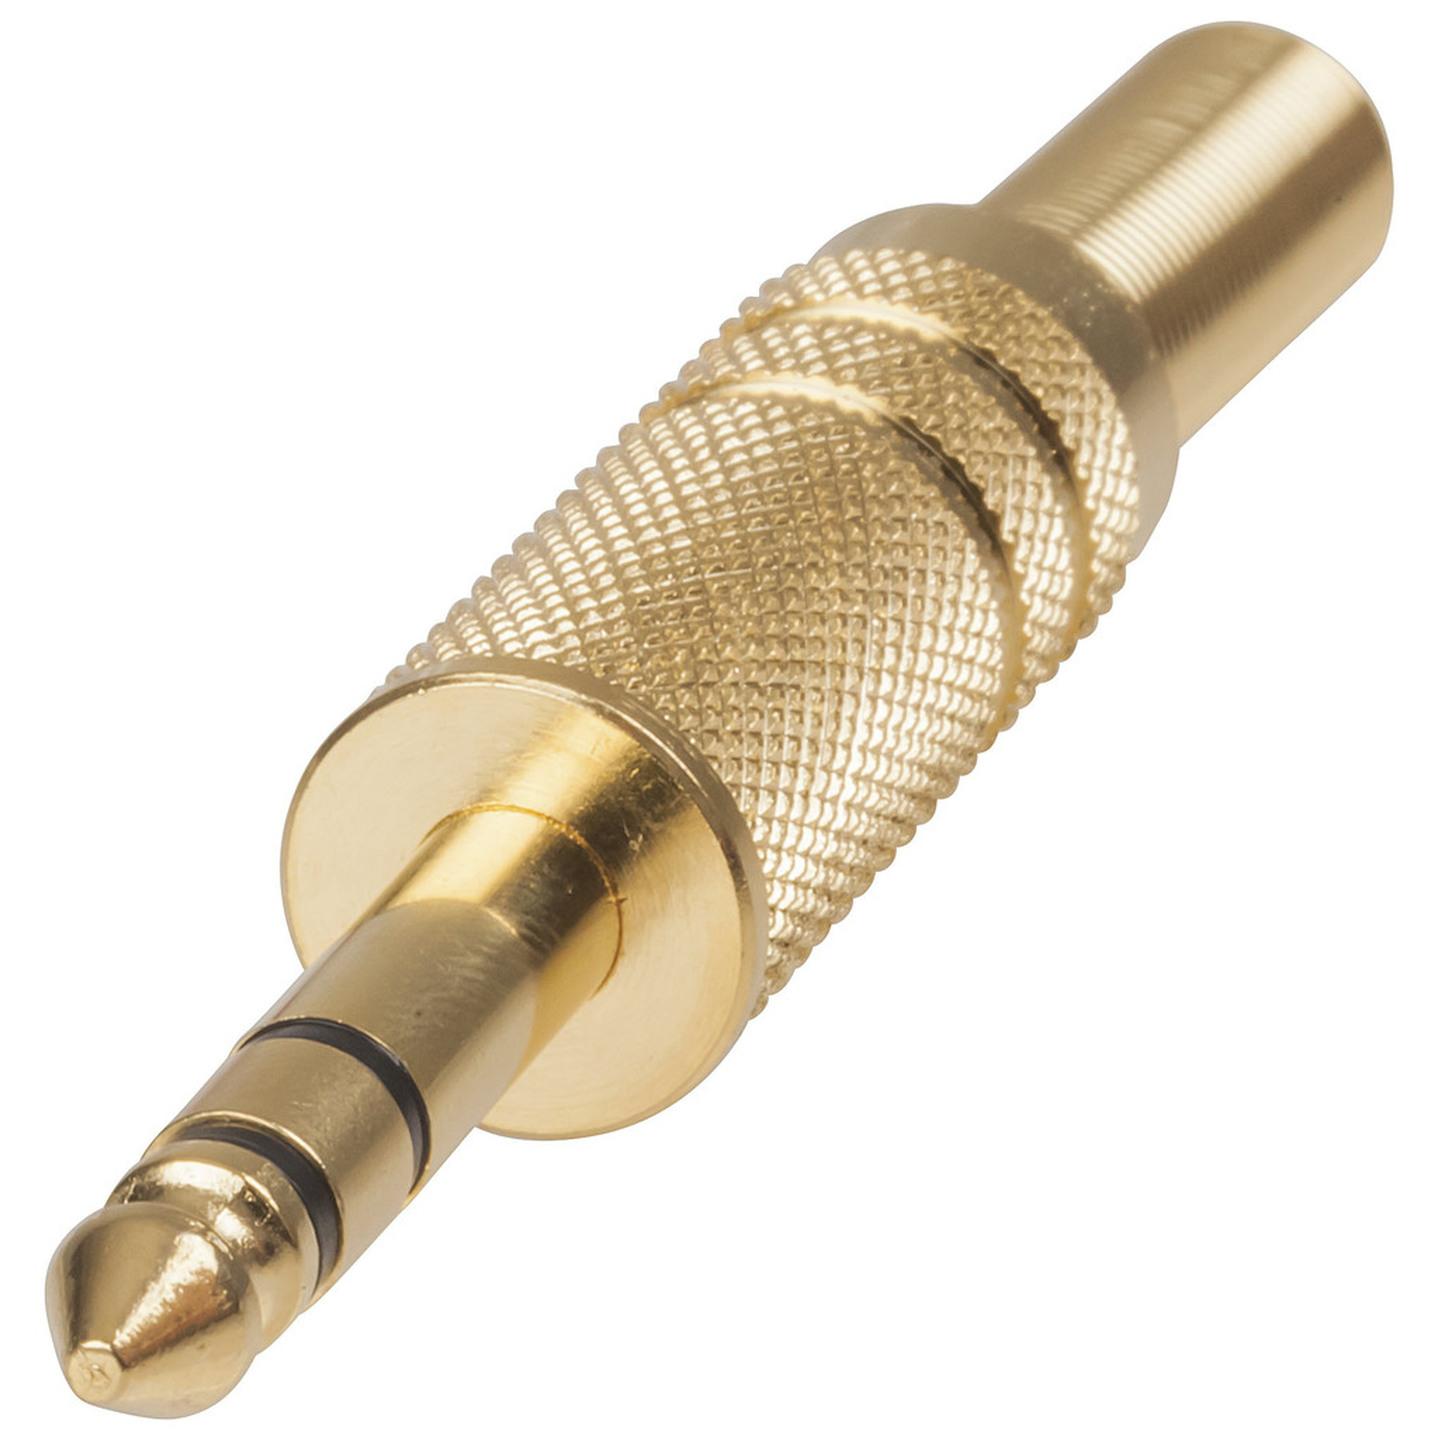 6.5mm Gold Stereo Plug with Spring